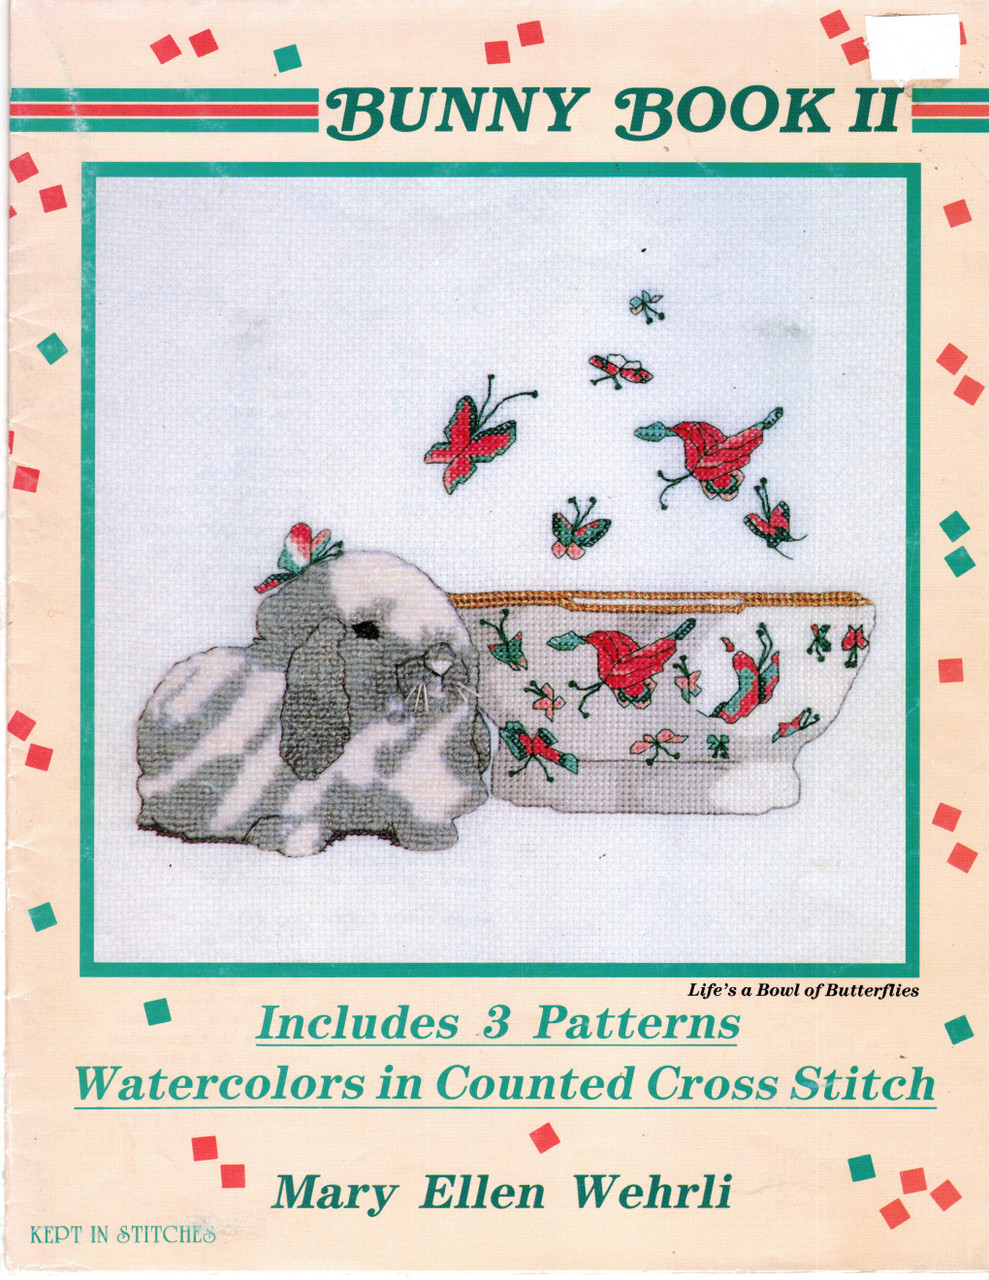 Count Your Stitches Vol II, Zims Creative Craft Cross Stitch